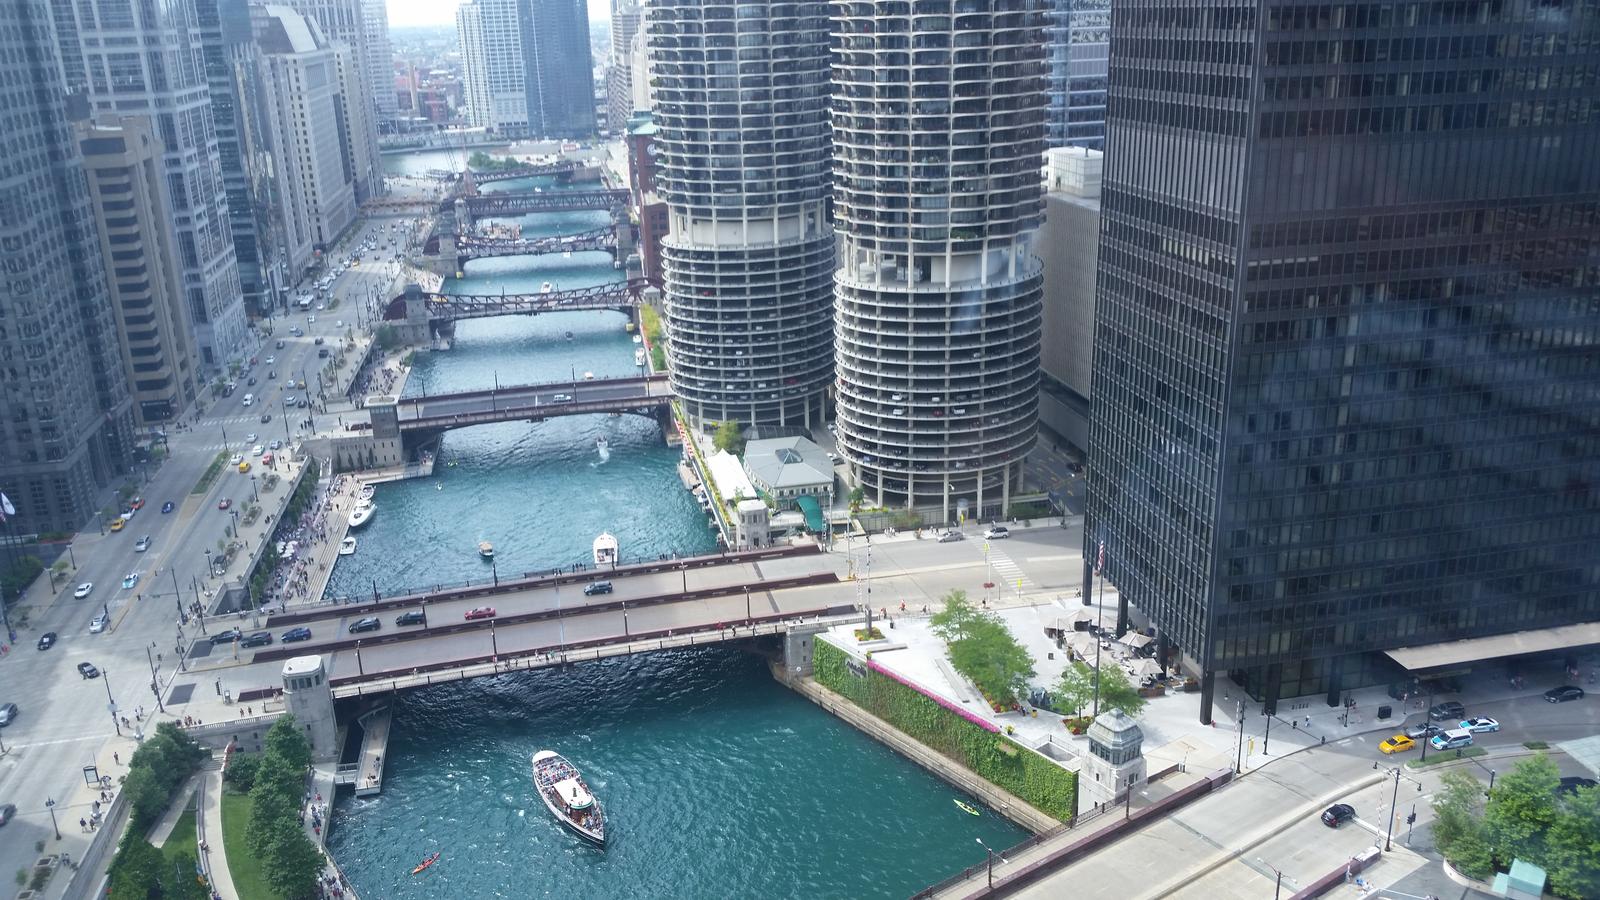 If You Can Score Over 76% On This Geography Test, You Definitely Know More Than Most People Chicago River, Illinois